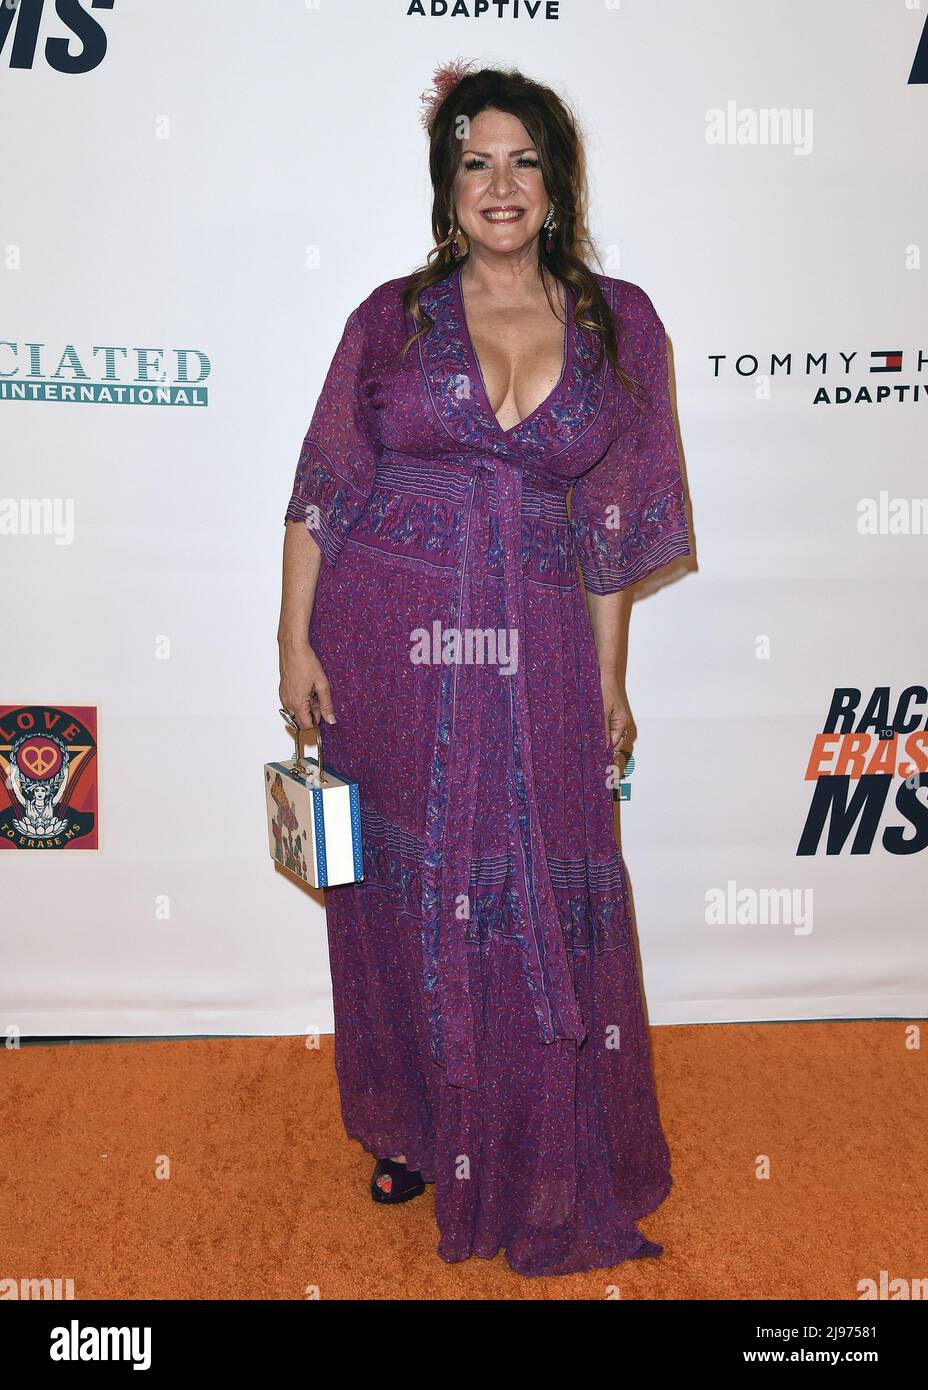 Los Angeles, USA. 21st May, 2022. Joely Fisher walking on the red carpet at the Race to Erase MS Gala at the Fairmont Century Plaza in Los Angeles, CA on May 20, 2022. (Photo By Scott Kirkland/Sipa USA) Credit: Sipa USA/Alamy Live News Stock Photo